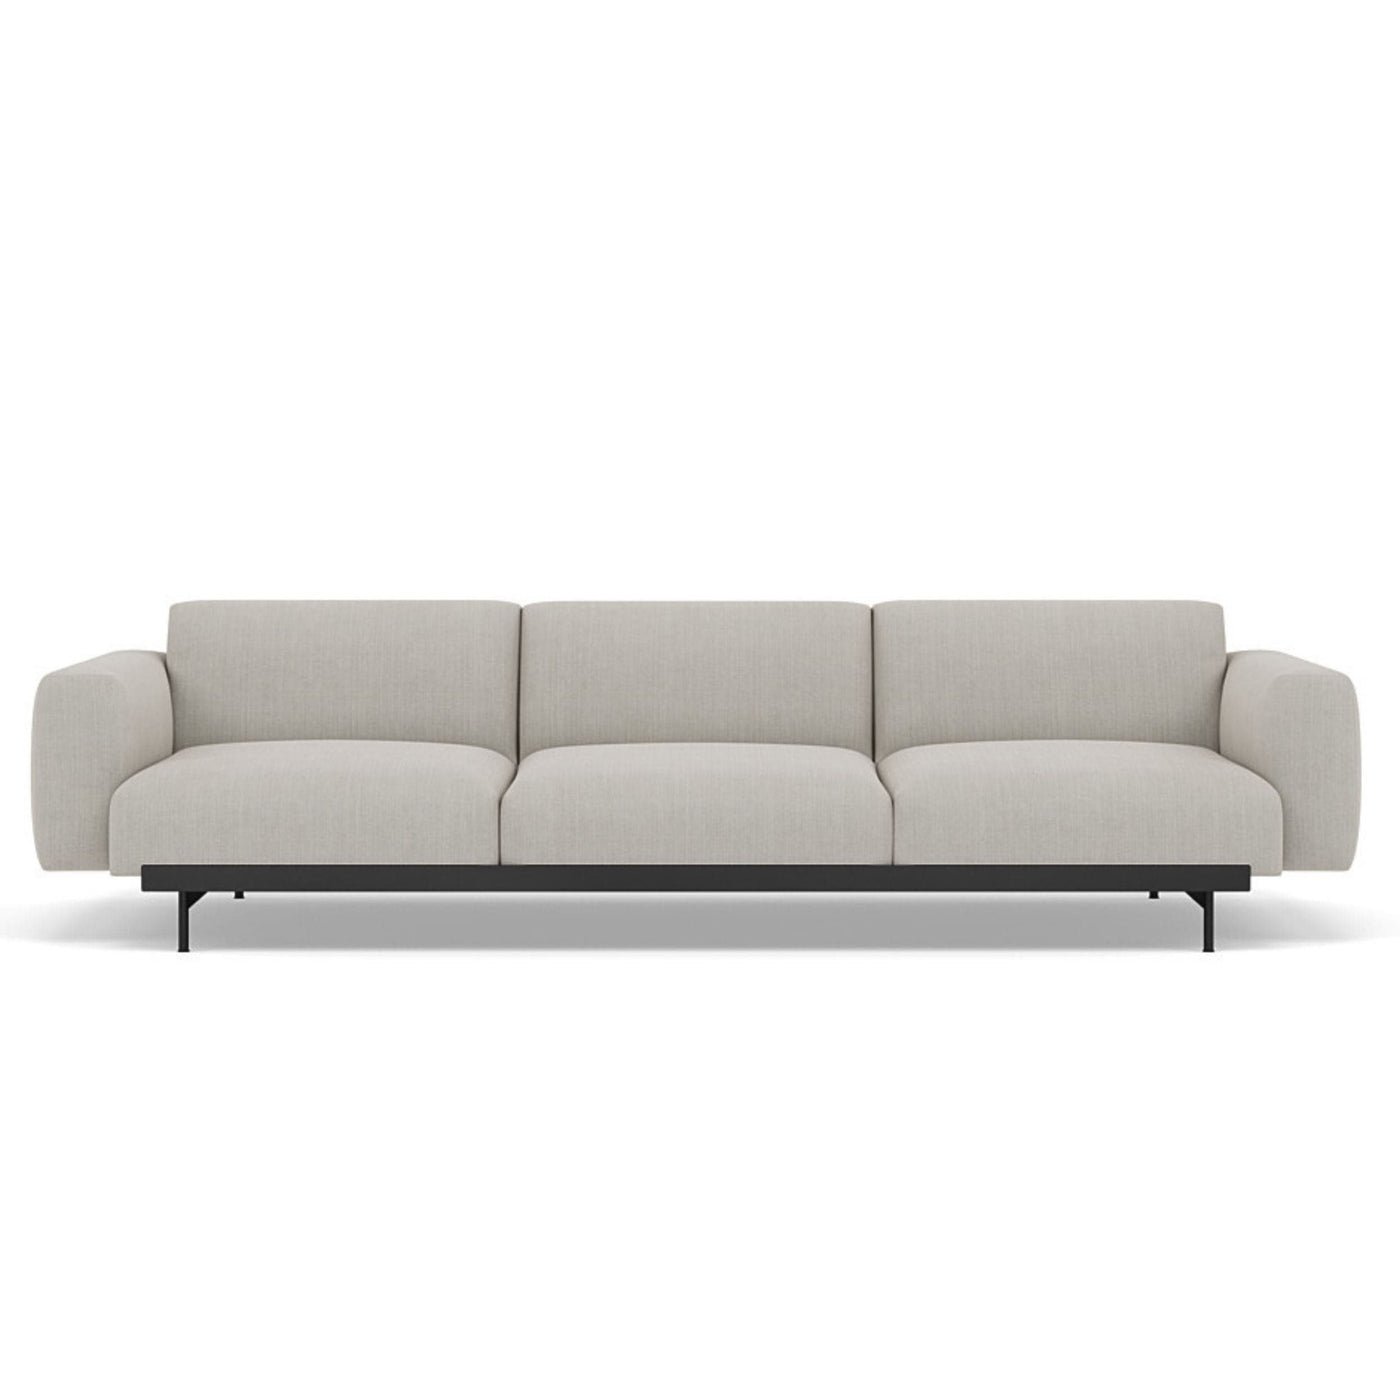 Muuto In Situ Modular 3 Seater Sofa, configuration 1. Made to order from someday designs. #colour_fiord-201